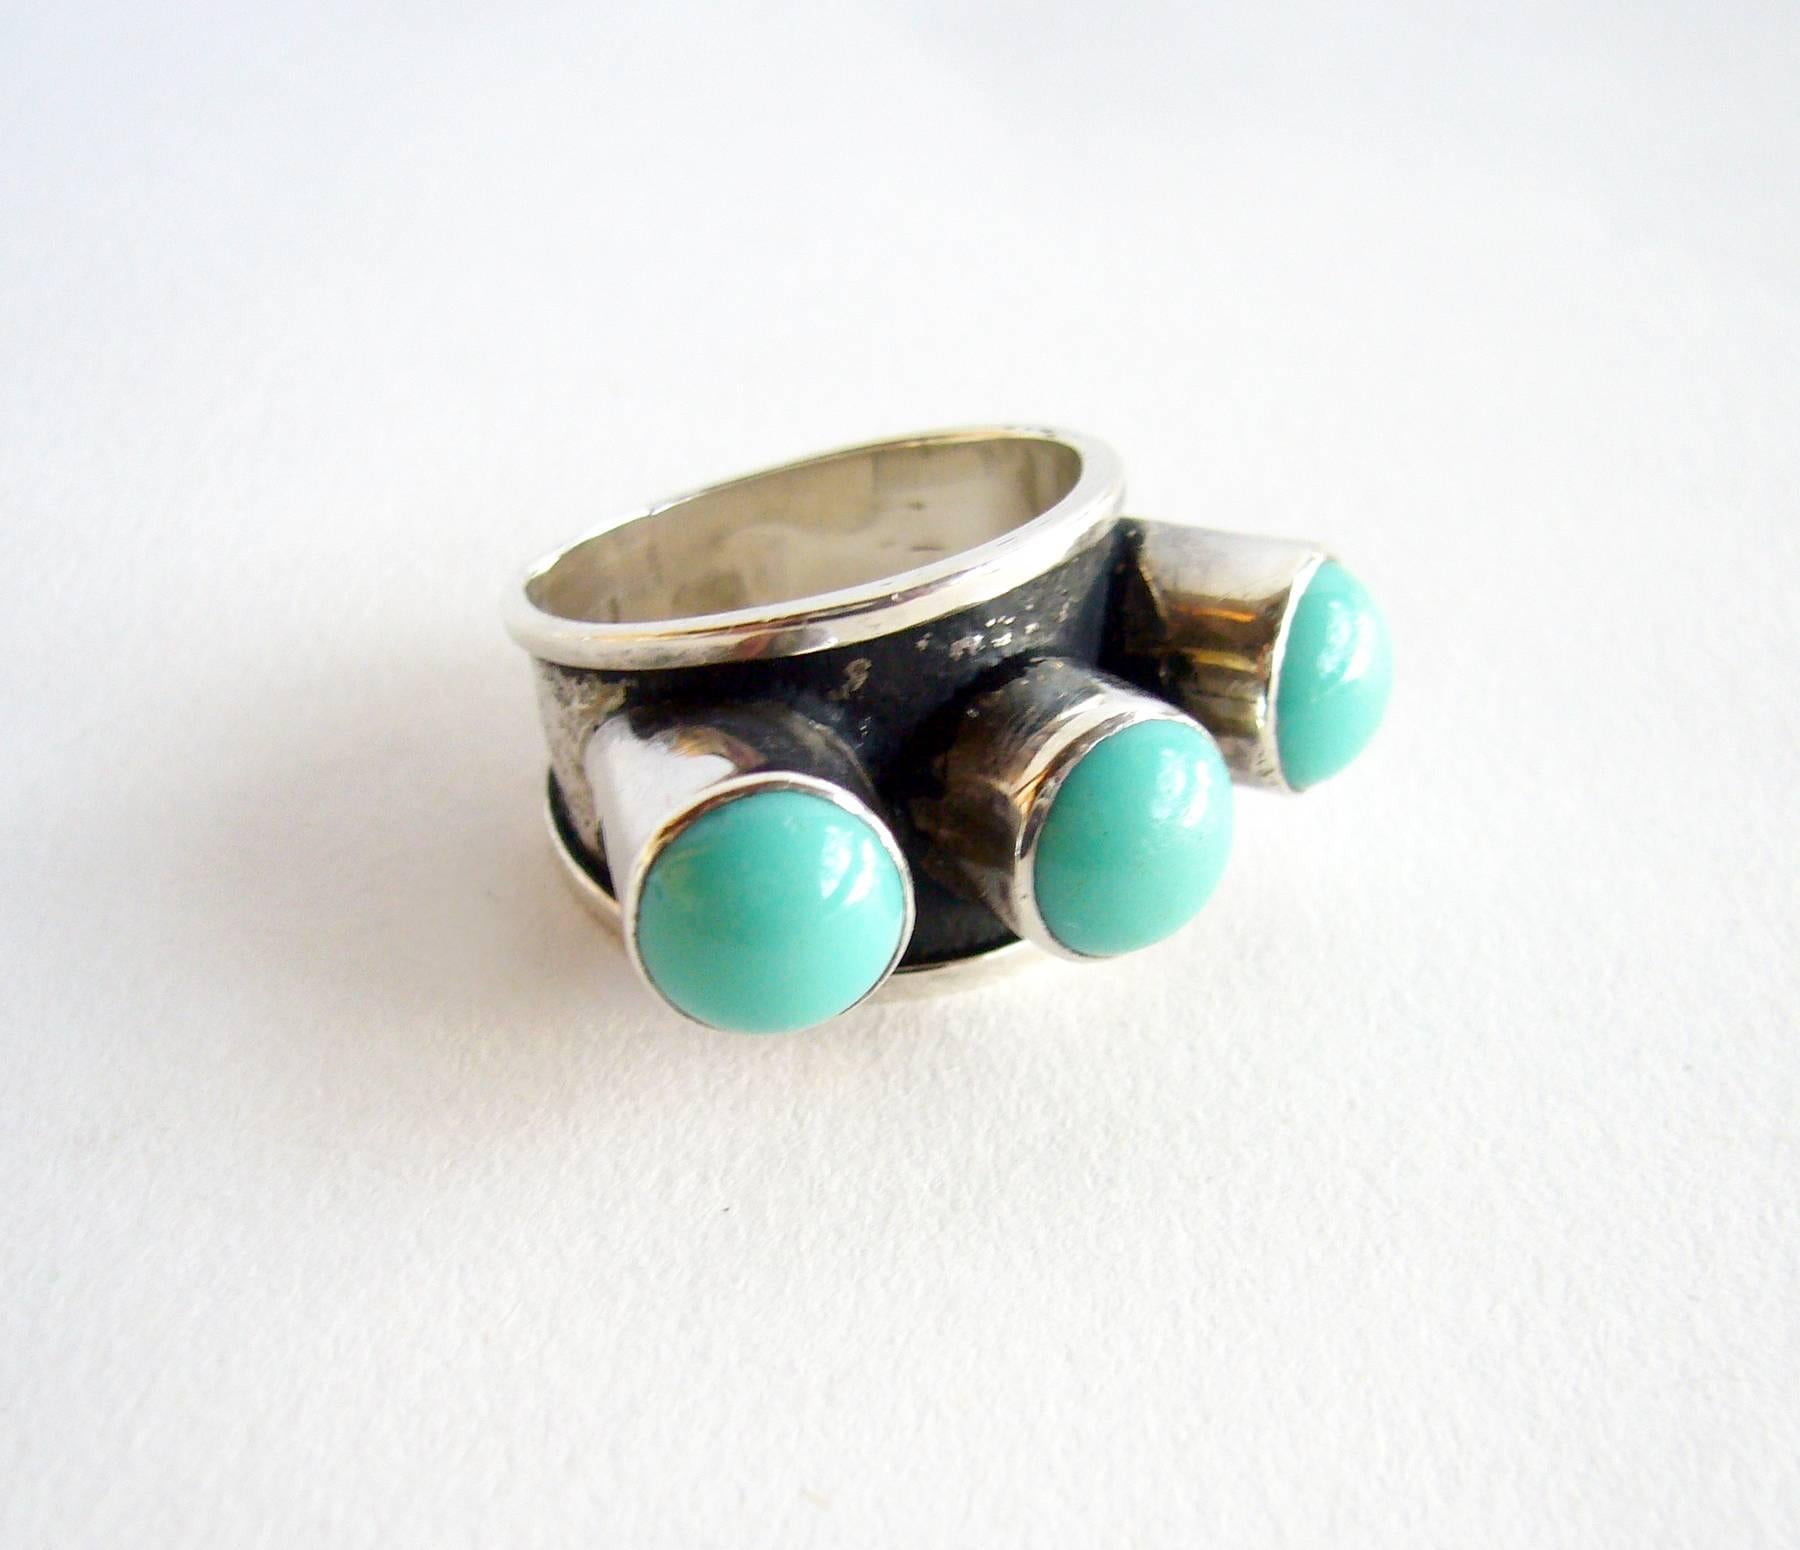 Sterling silver and turquoise ring created by Master sculptor, painter and jeweler, Oswaldo Guayasamin of Ecuador.  Ring is a finger size 7.  Signed GuayasaminIn and in very good vintage condition.